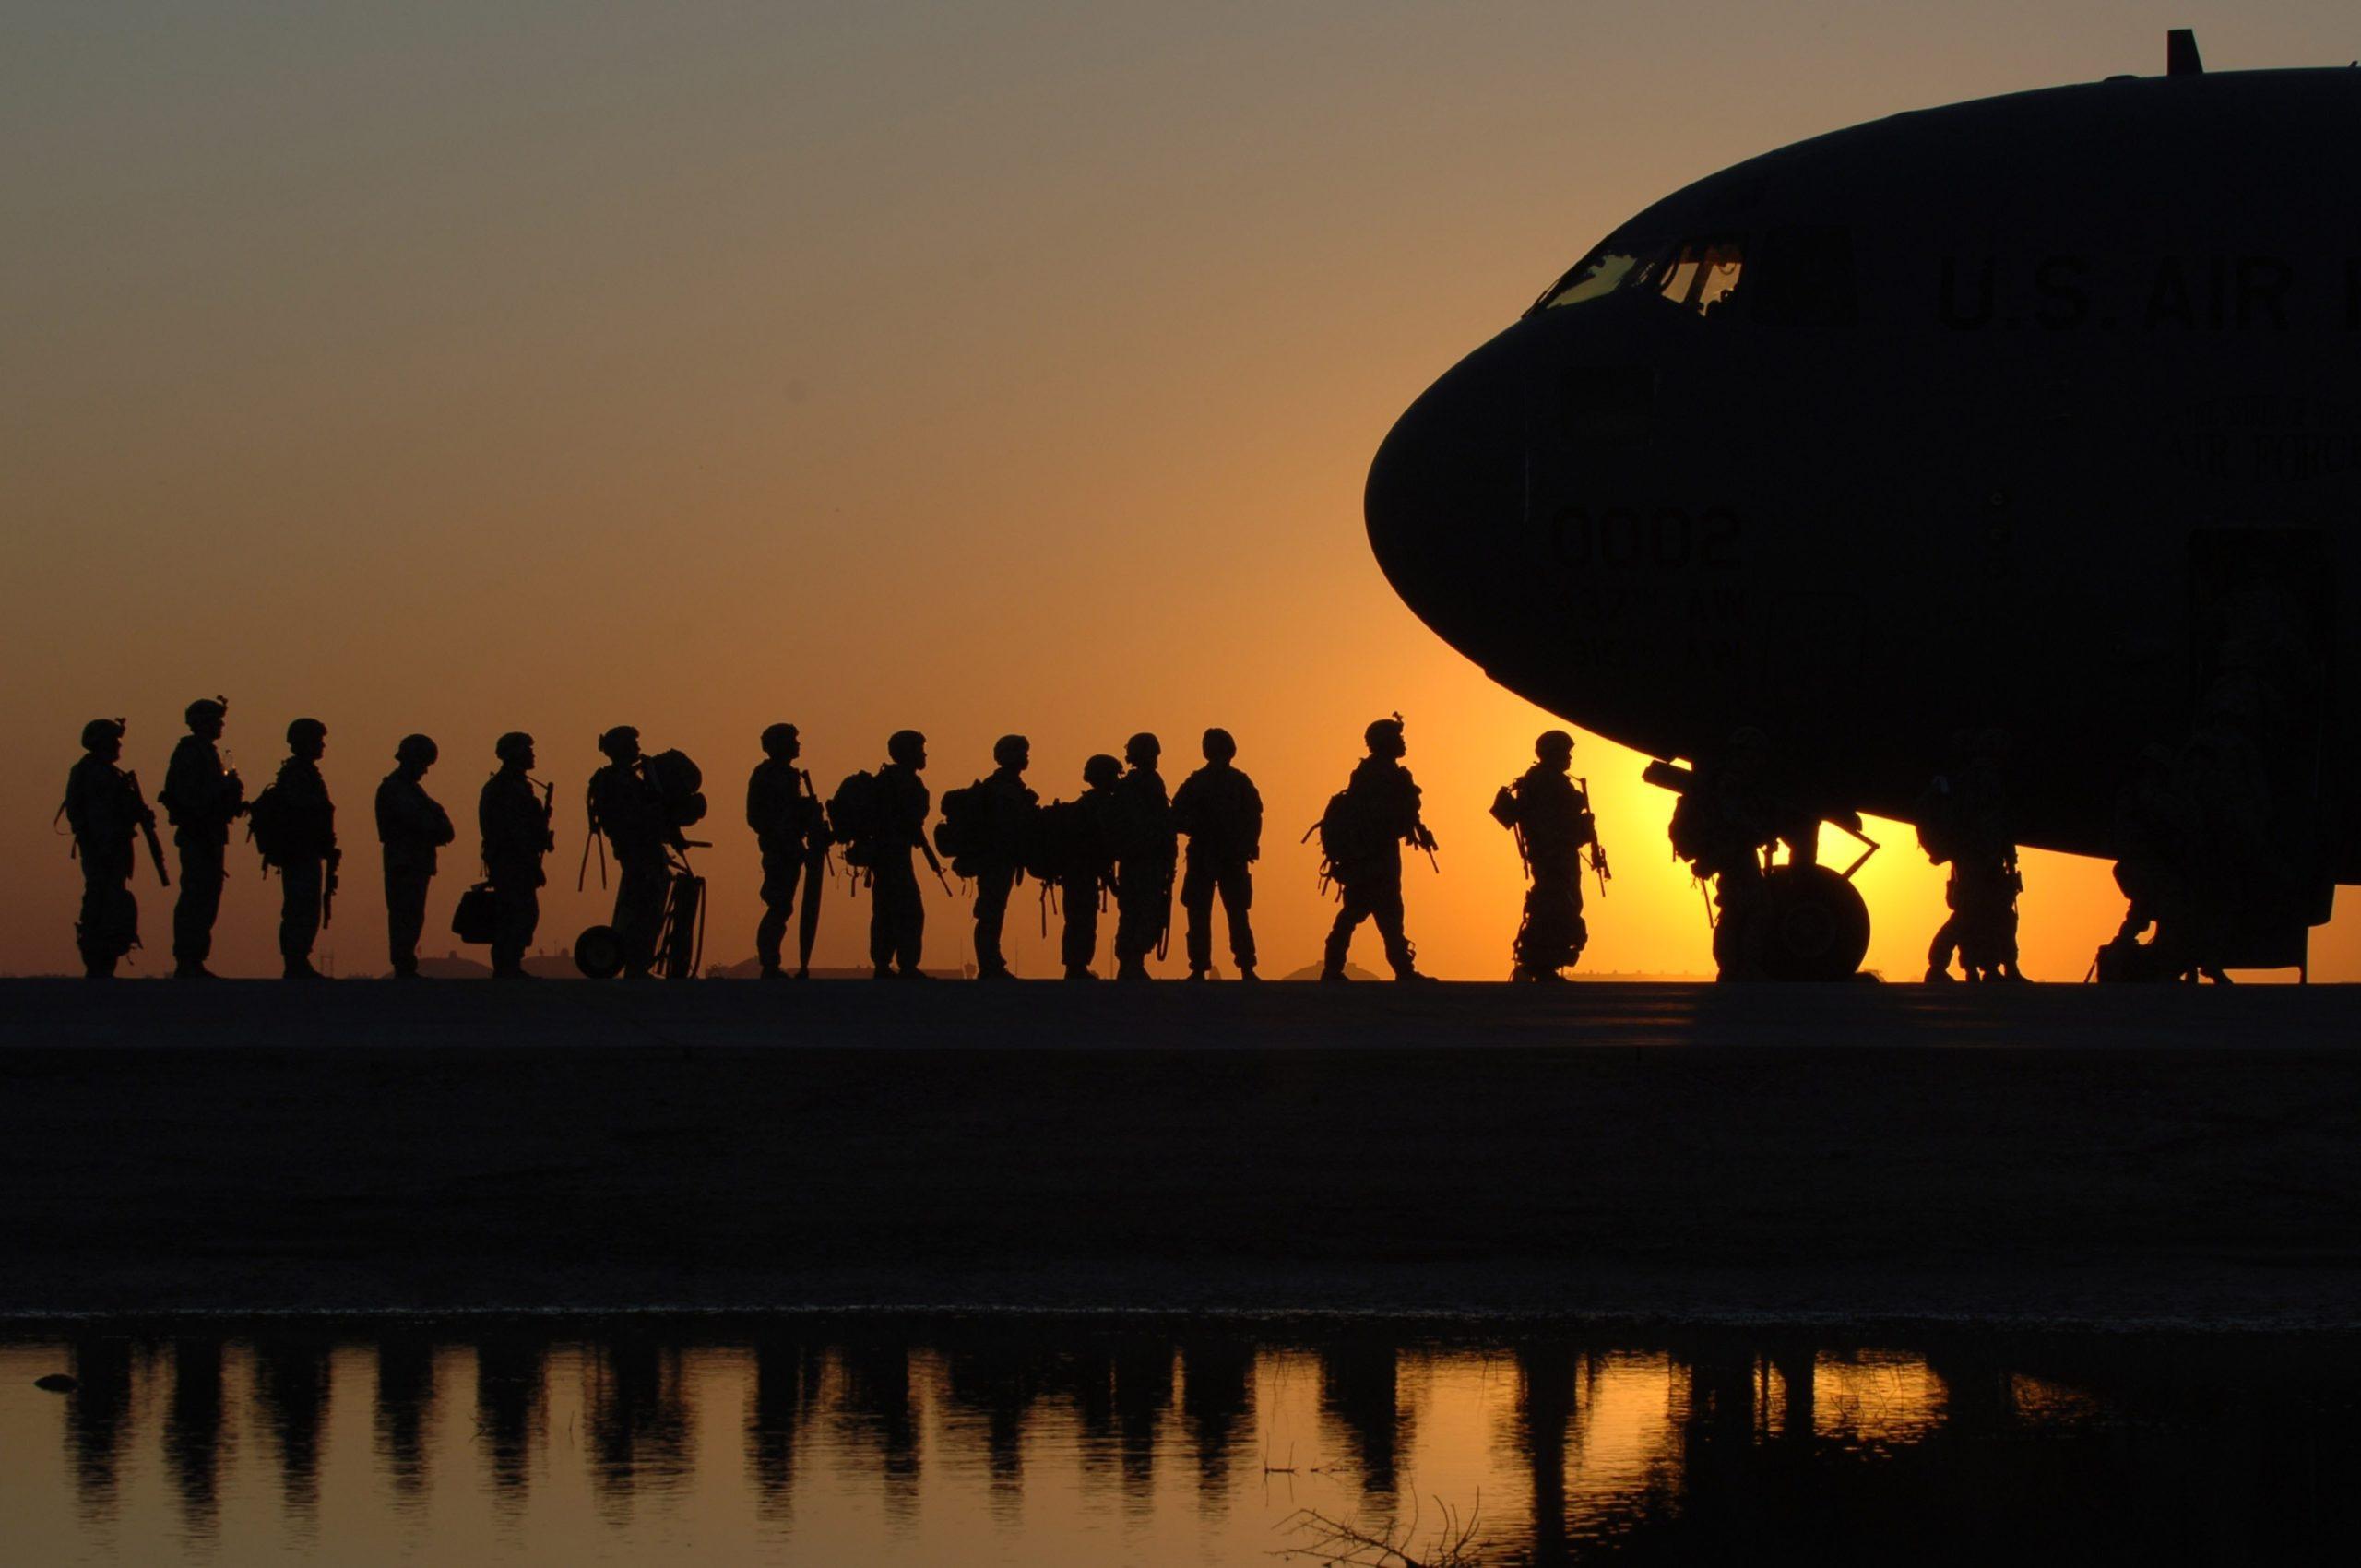 Soldiers lined up in front of a plane, against the sunset